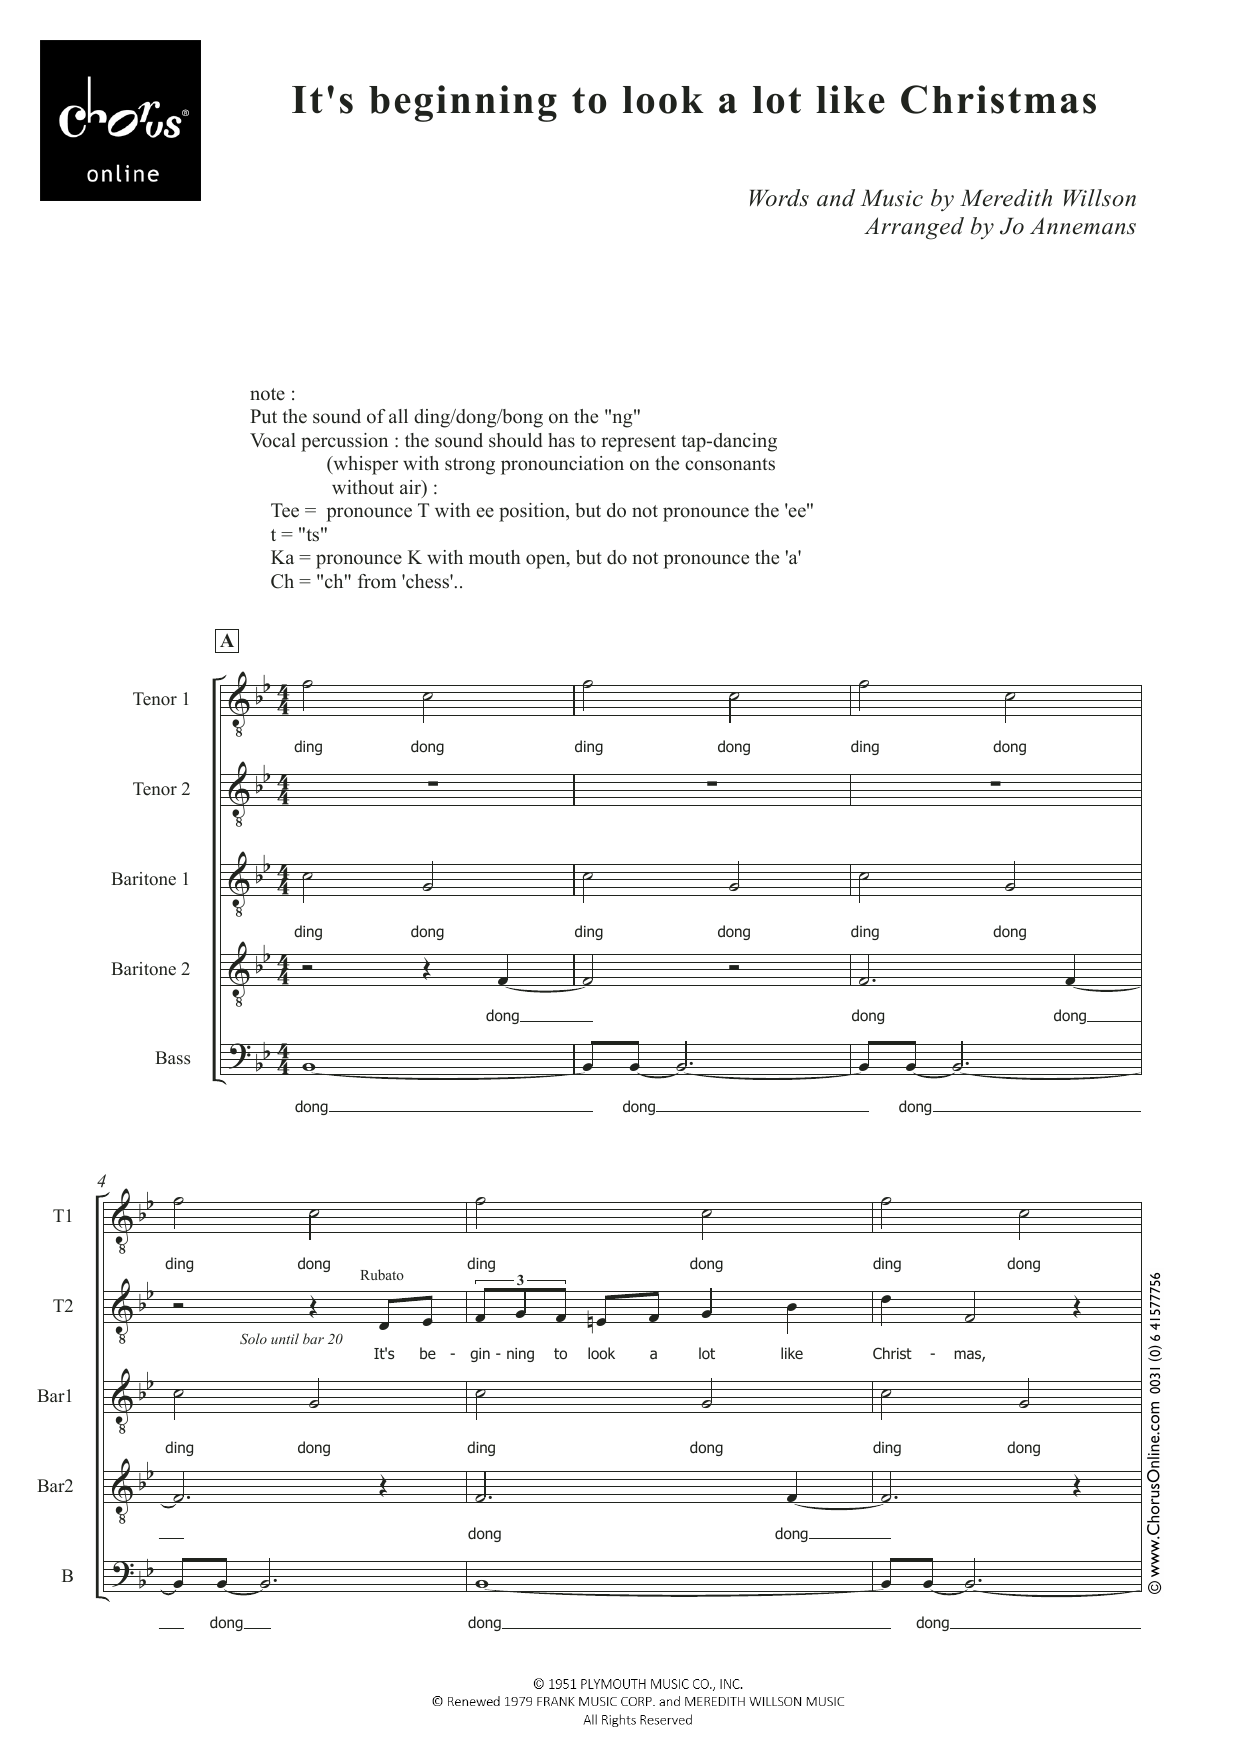 Michael Bublé It's Beginning To Look Like Christmas (arr. Jo Annemans) sheet music notes printable PDF score